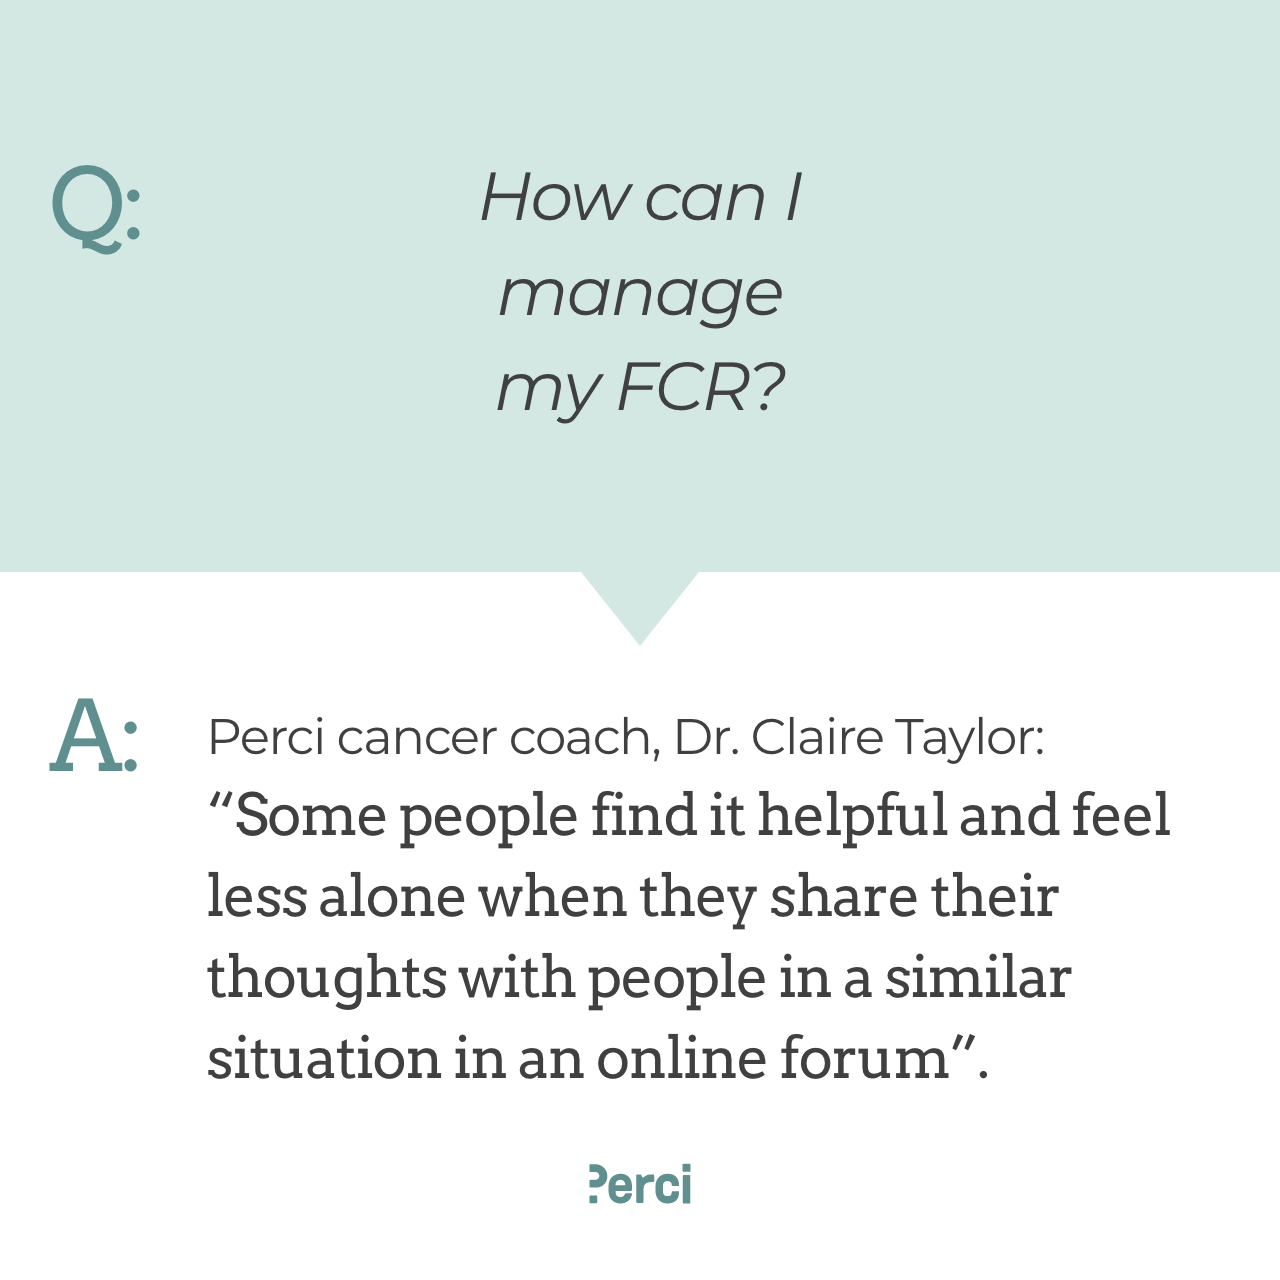 An image with copy which reads, Question: How can I manage my FCR? Answer: Perci cancer coach, Dr. Claire Taylor: "Some people find it helpful and feel less alone when they share their thoughts with people in a similar situation in an online forum".